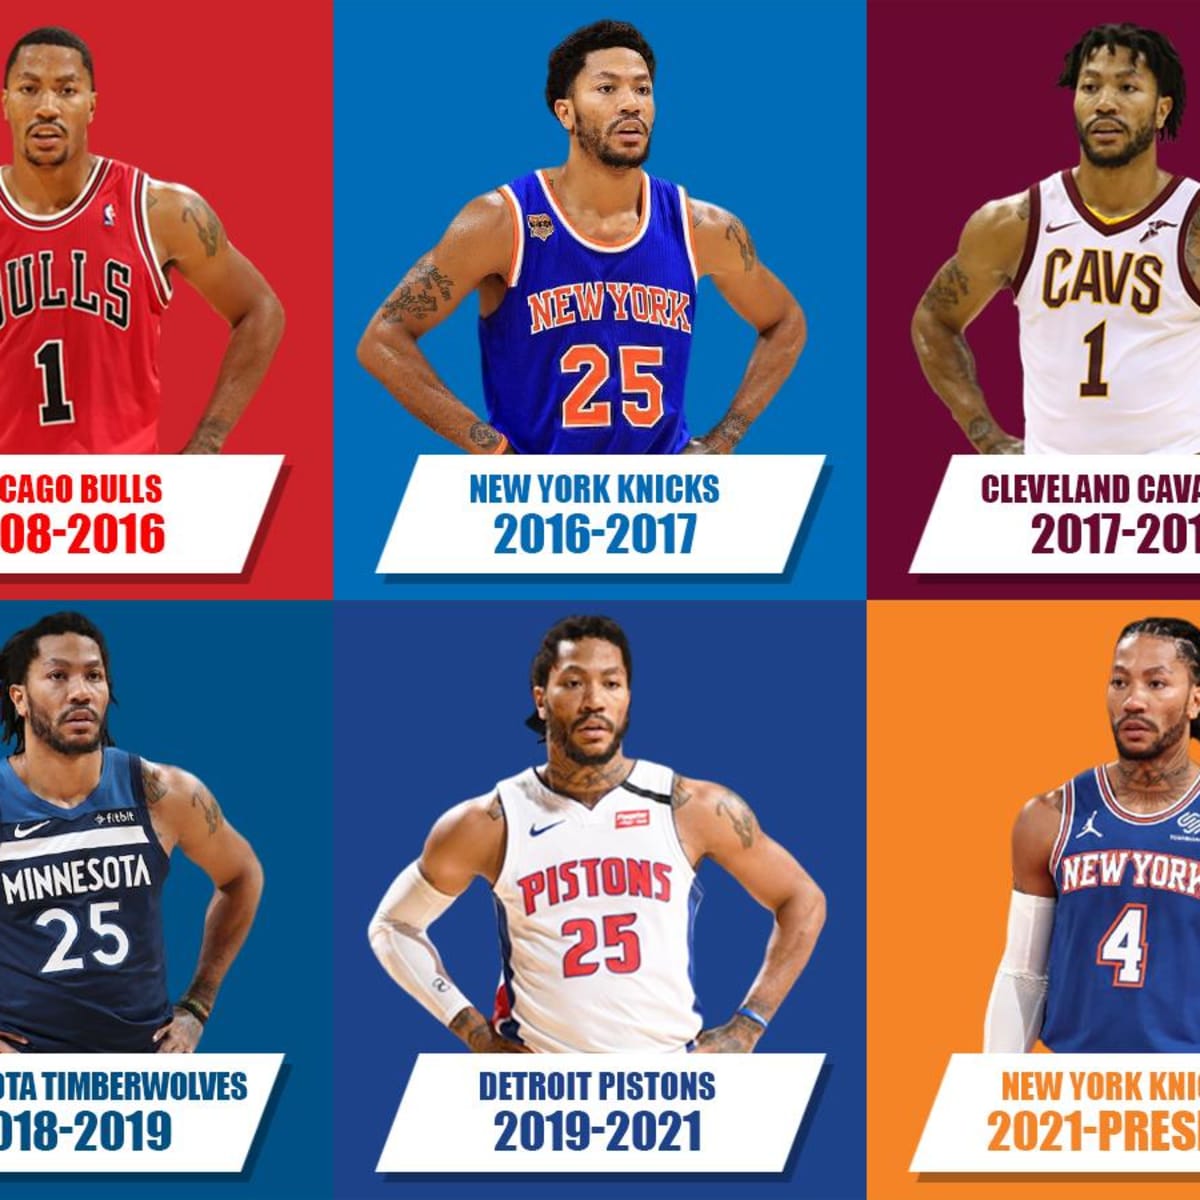 Derrick Rose hoping for 'something special' after trade to New York